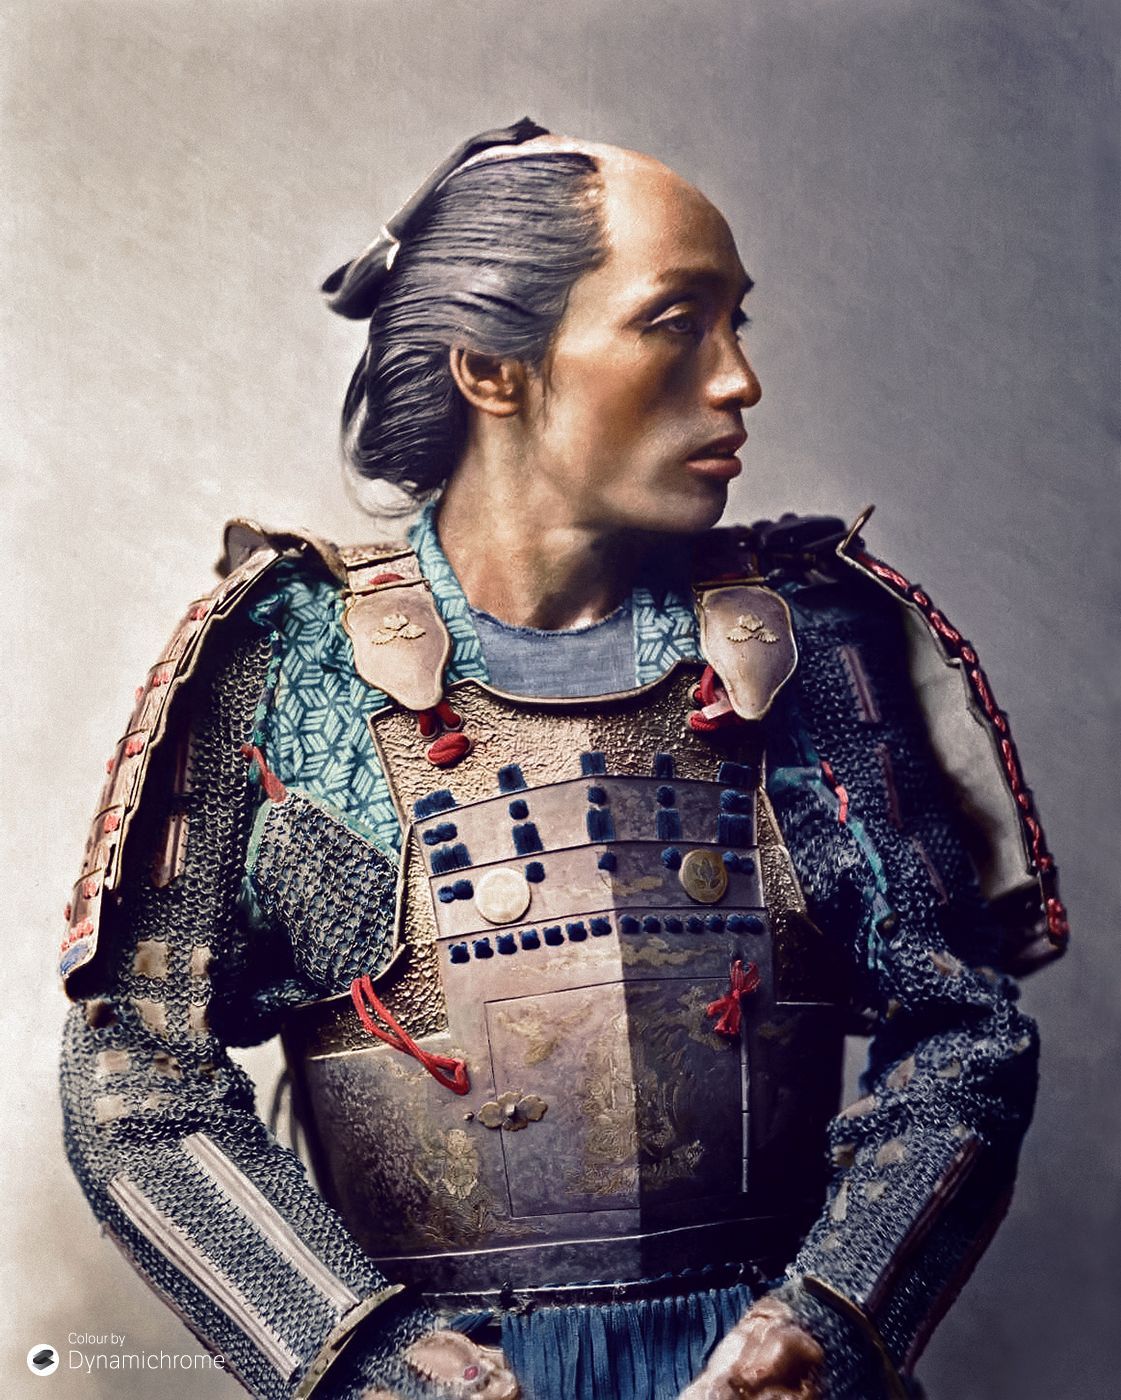 constantarrival:
“Colourisation from a albumen silver print. 1881, Yokohama, Japan, by Franz von Stillfried-Ratenicz. Courtesy of the Capital Collections
Image Caption: “A portrait of a Japanese soldier from the waist up. He is standing facing his...